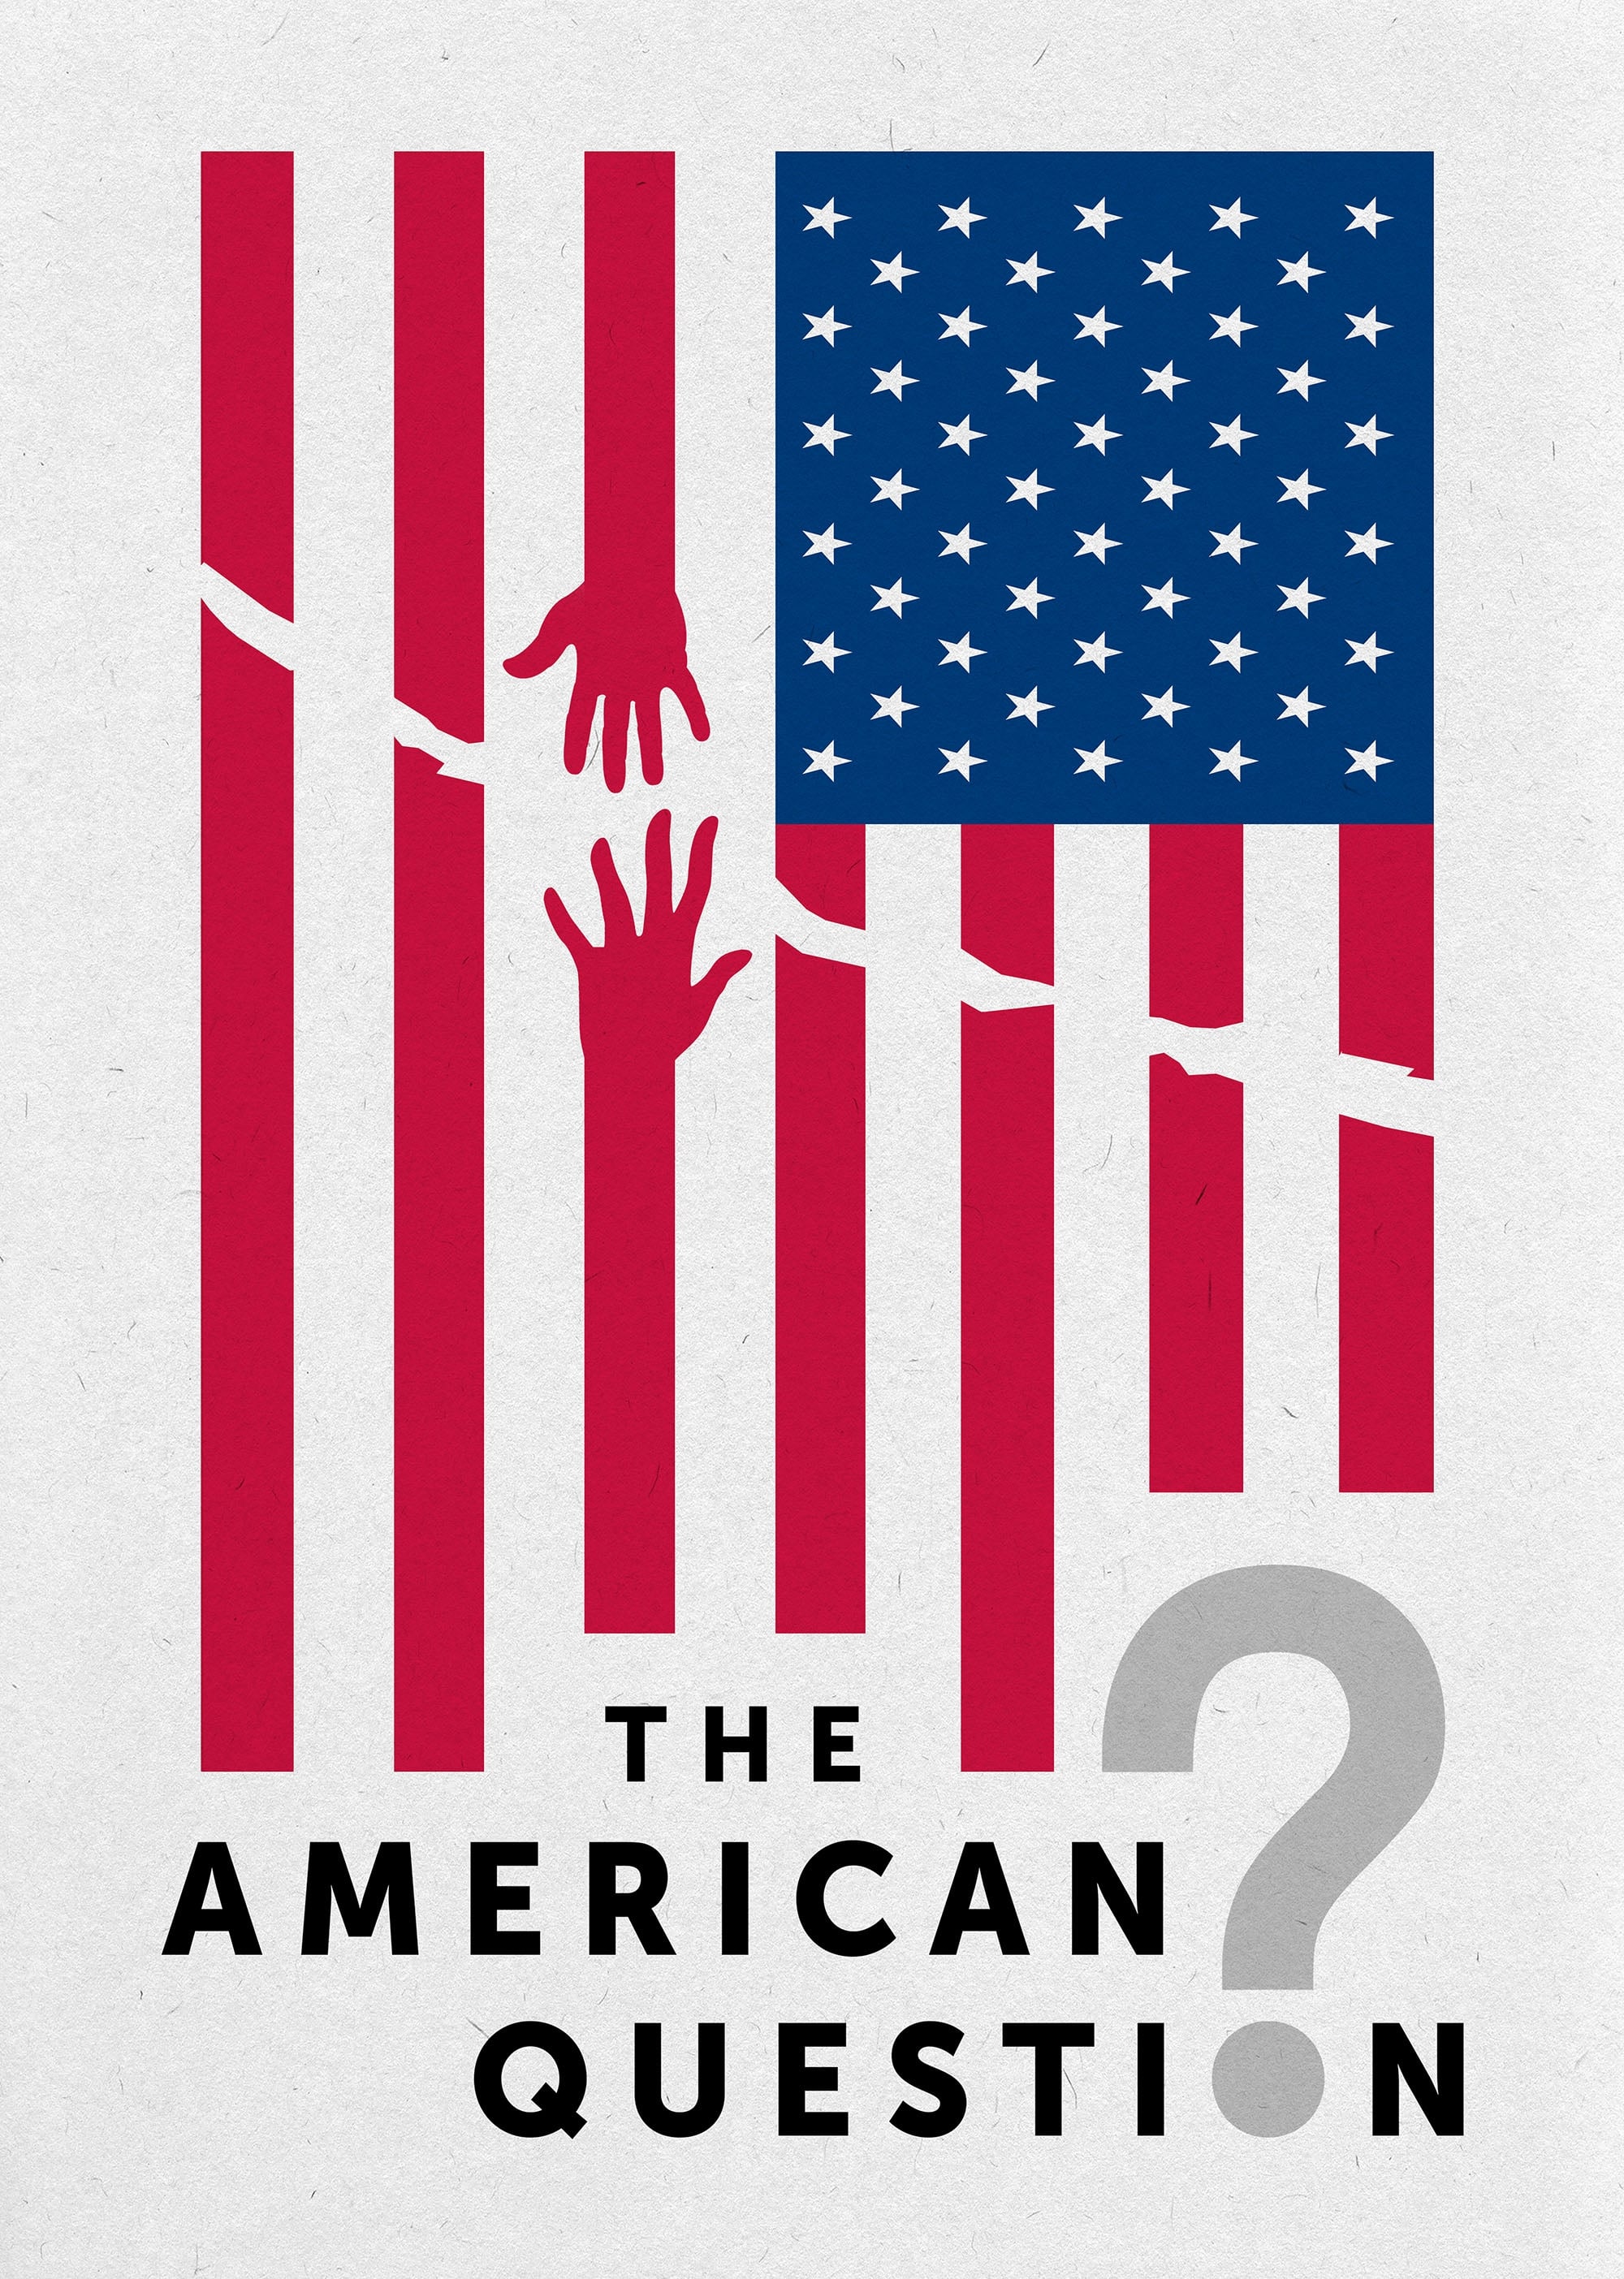 The American Question